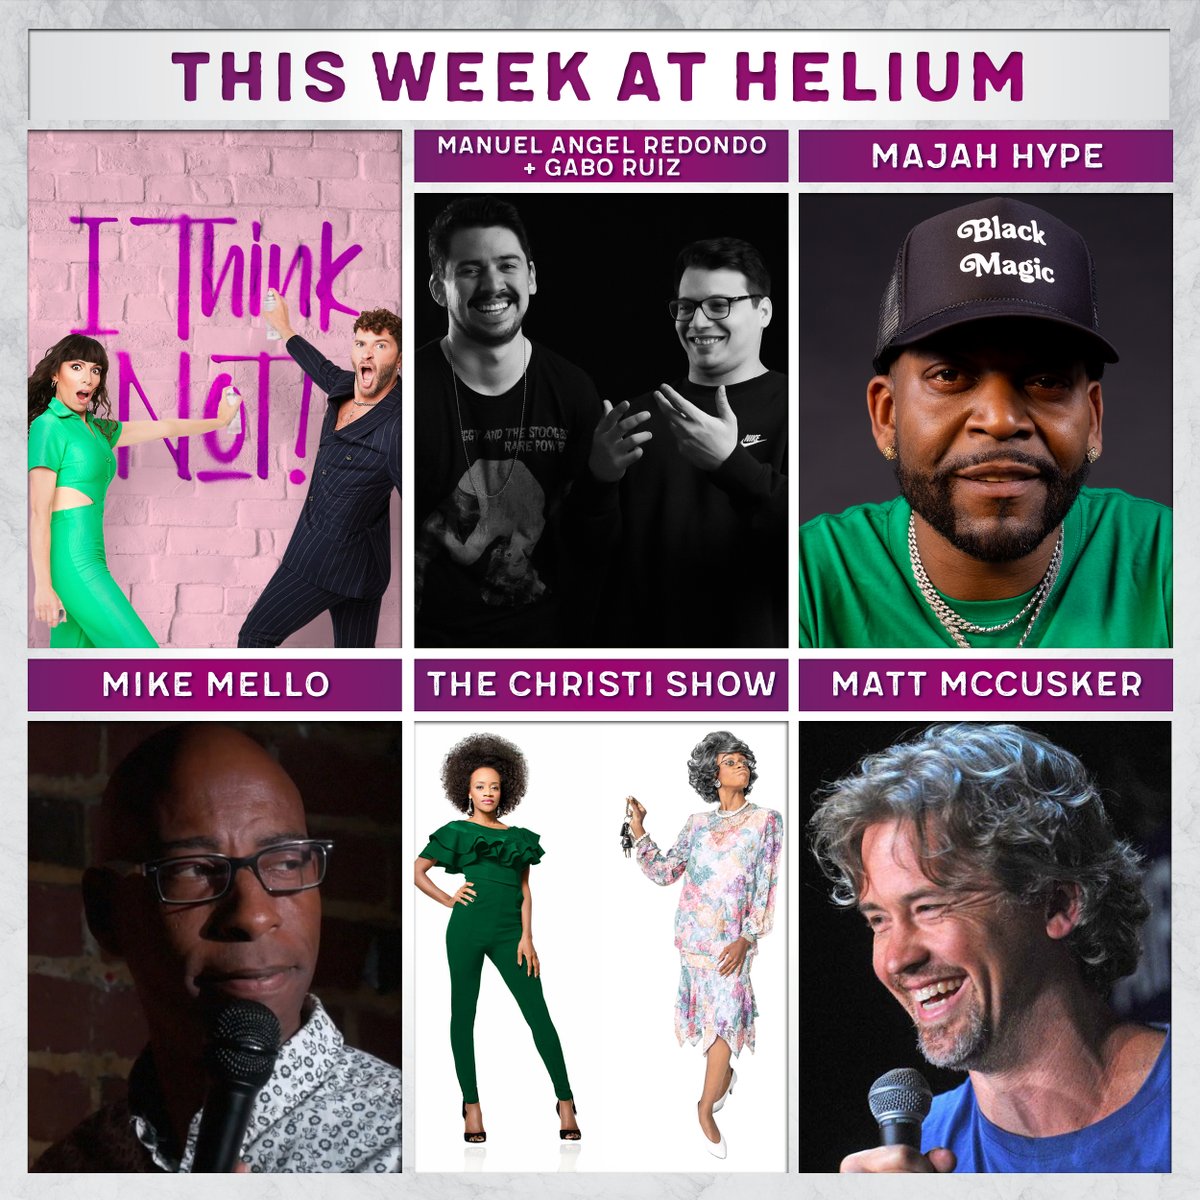 This Week at Helium | @ithinknotpod Live, @ManuelAngel & @EsGaboruiz, Majah Hype, @The_ChristiShow, Mike Mello will be Upstairs, + @mattwritesbooks headlines this weekend! Grab your tickets here: bit.ly/3QzPDCy